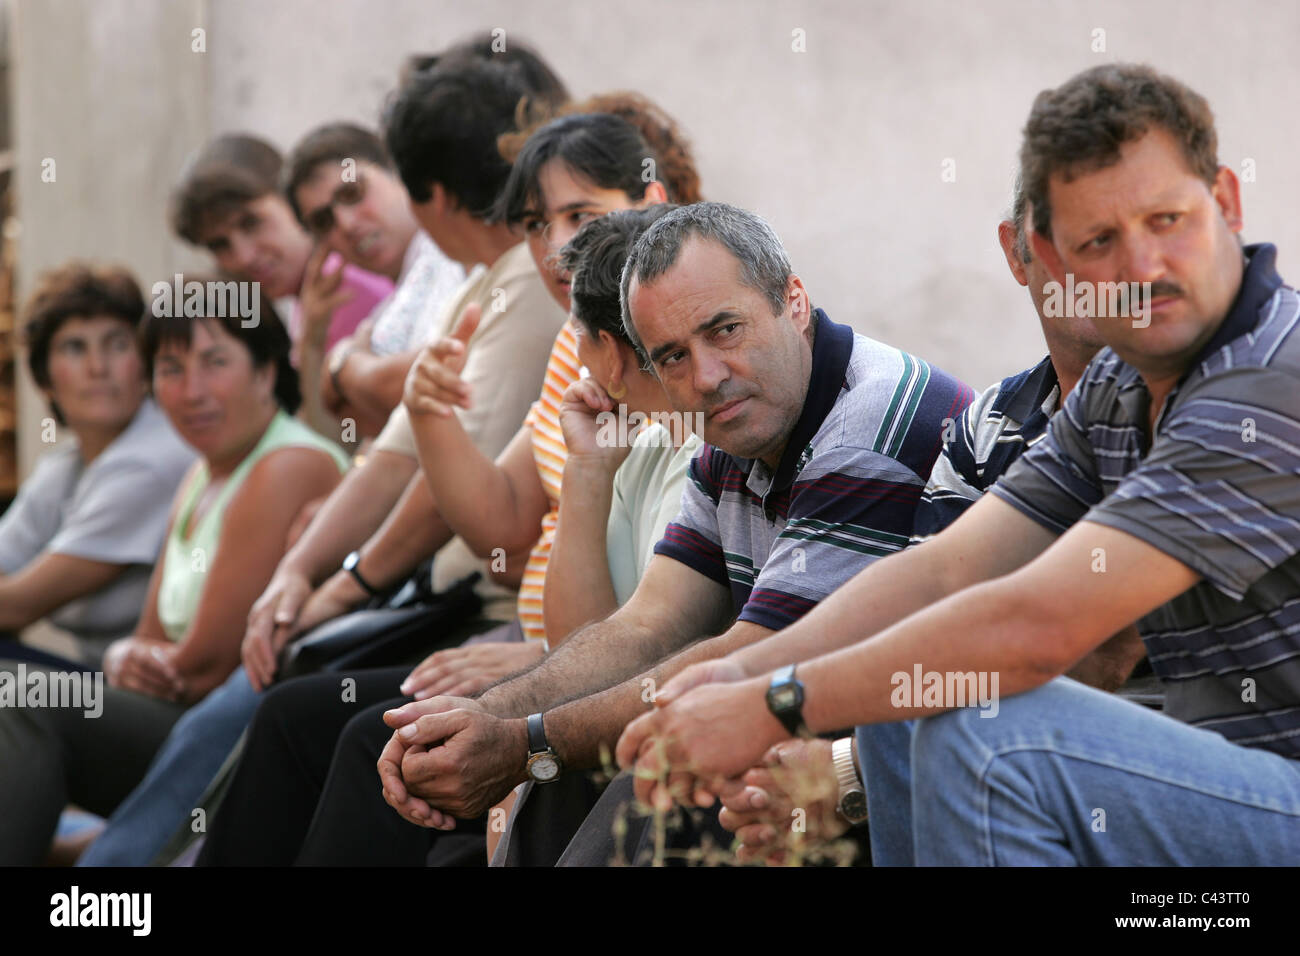 Group of portuguese people Stock Photo